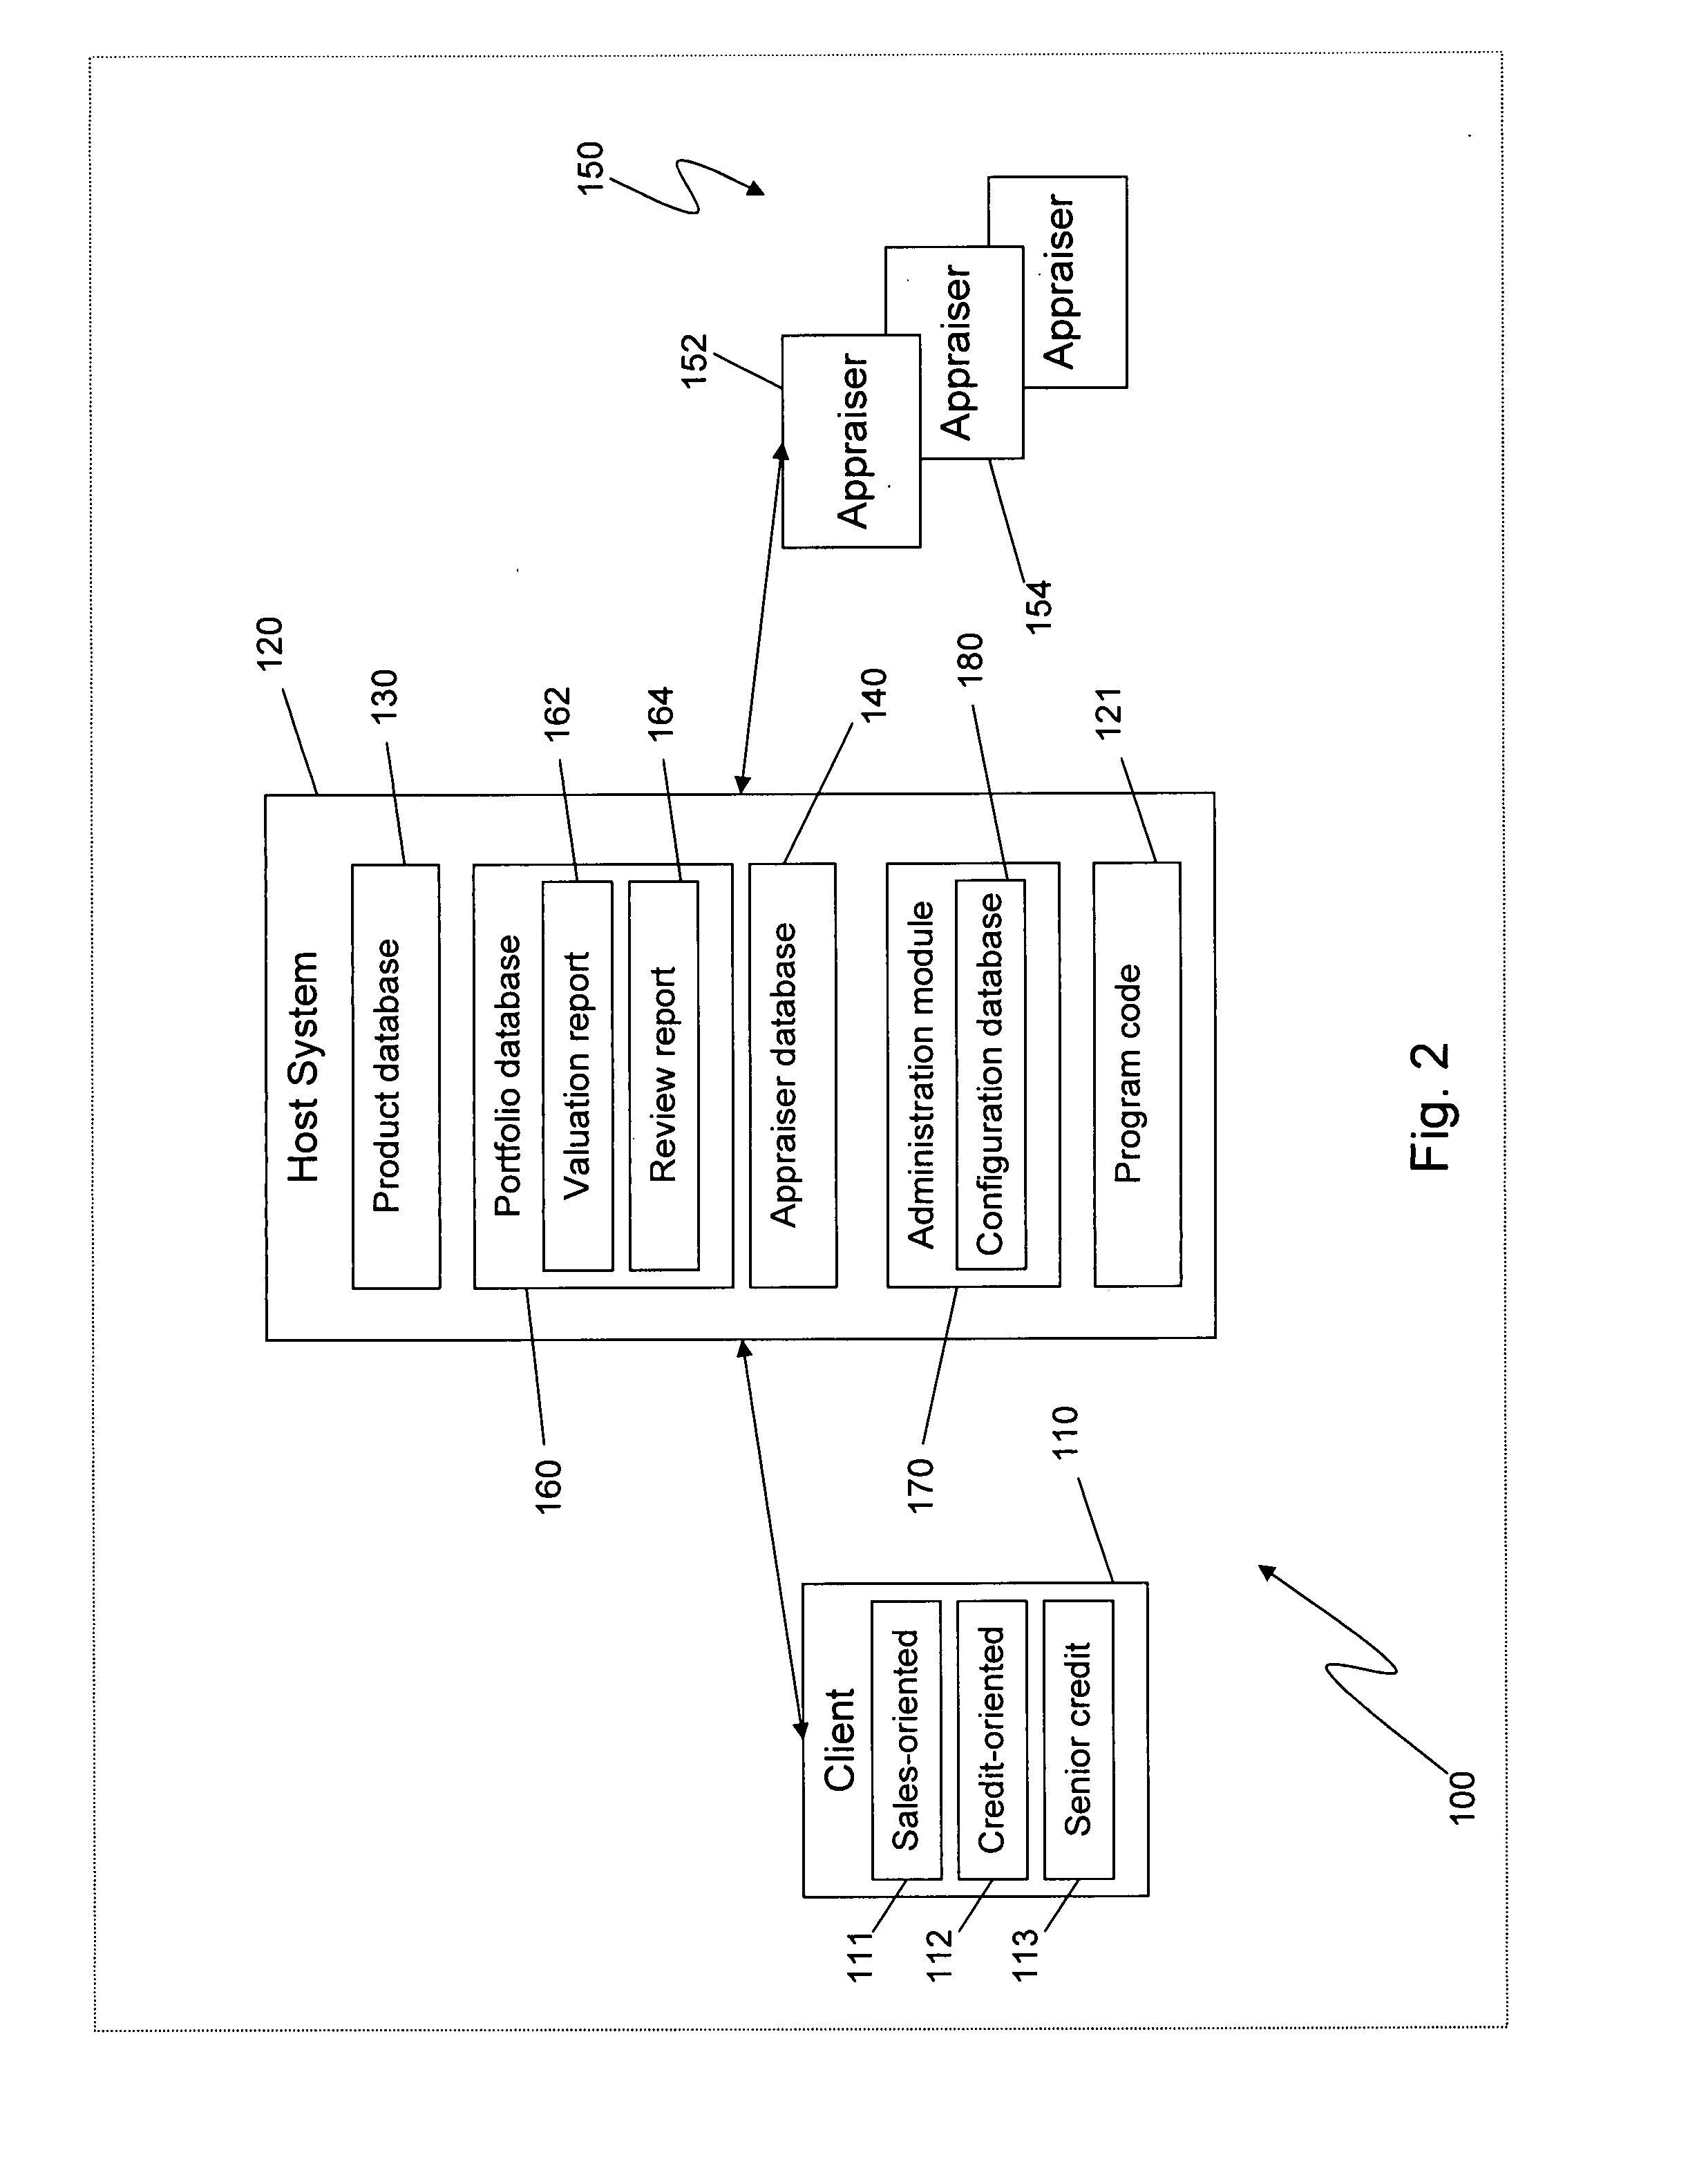 Method for facilitating the ordering, completion and delivery of real estate appraisals